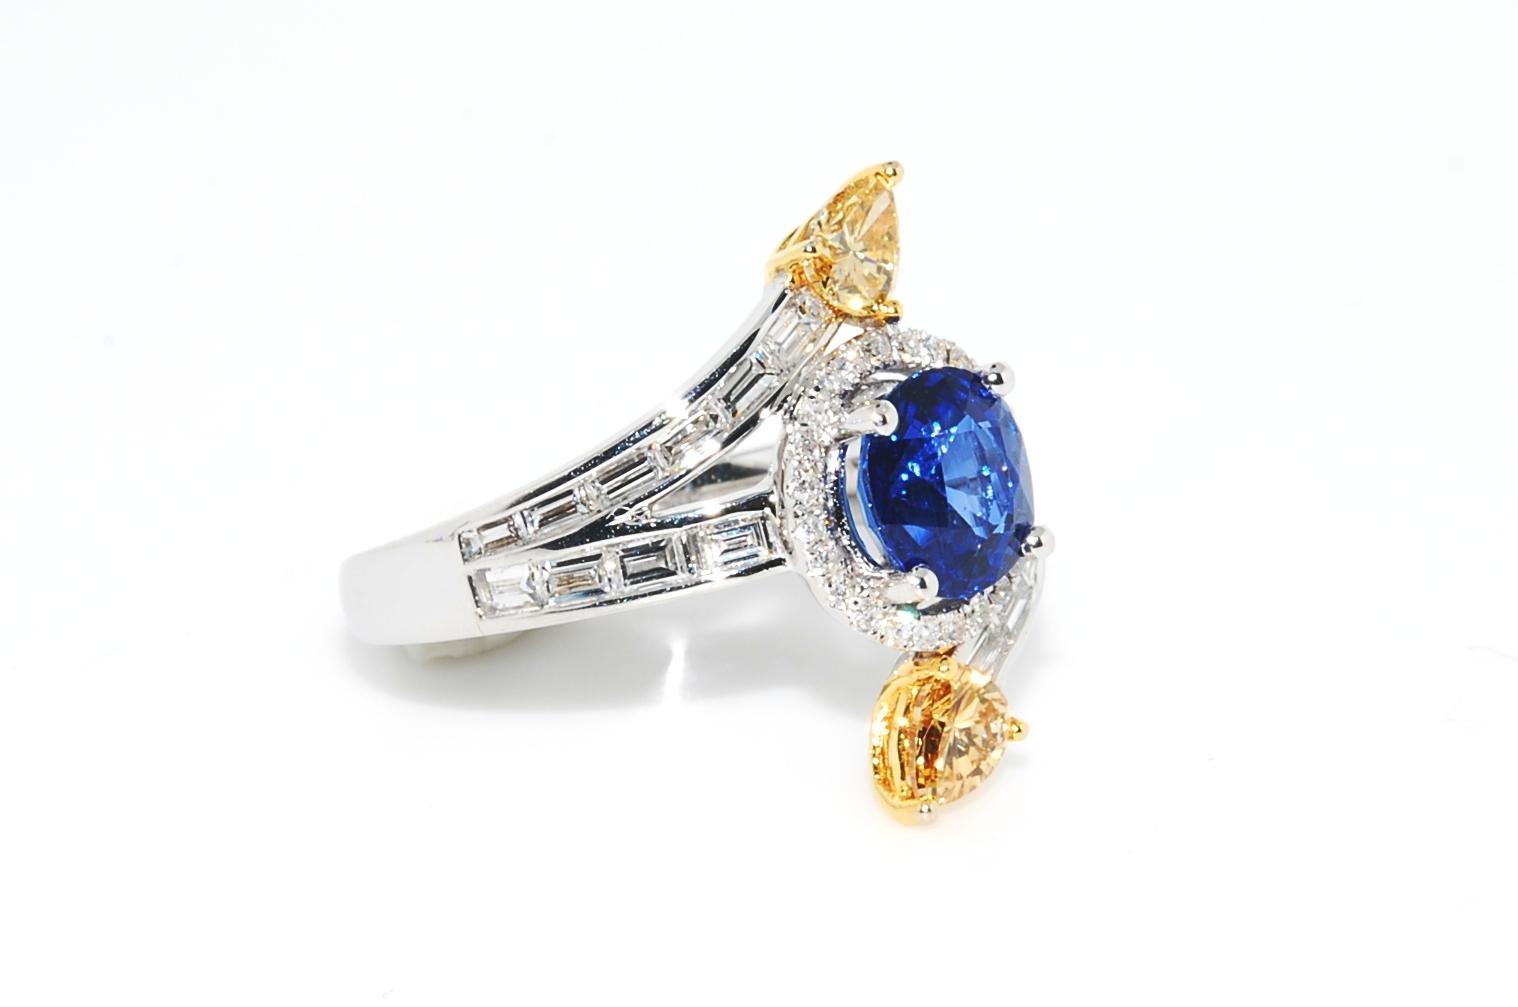 1.86 carat top quality sapphire 6.95 x 6.52 x 4.65mm's prong set in 6.9 grams of 18 karat white gold. This beautiful sapphire is surrounded by a halo of G VS round full cut diamonds (.24cts). It also features 18 baguette diamonds (.24 cts) and two